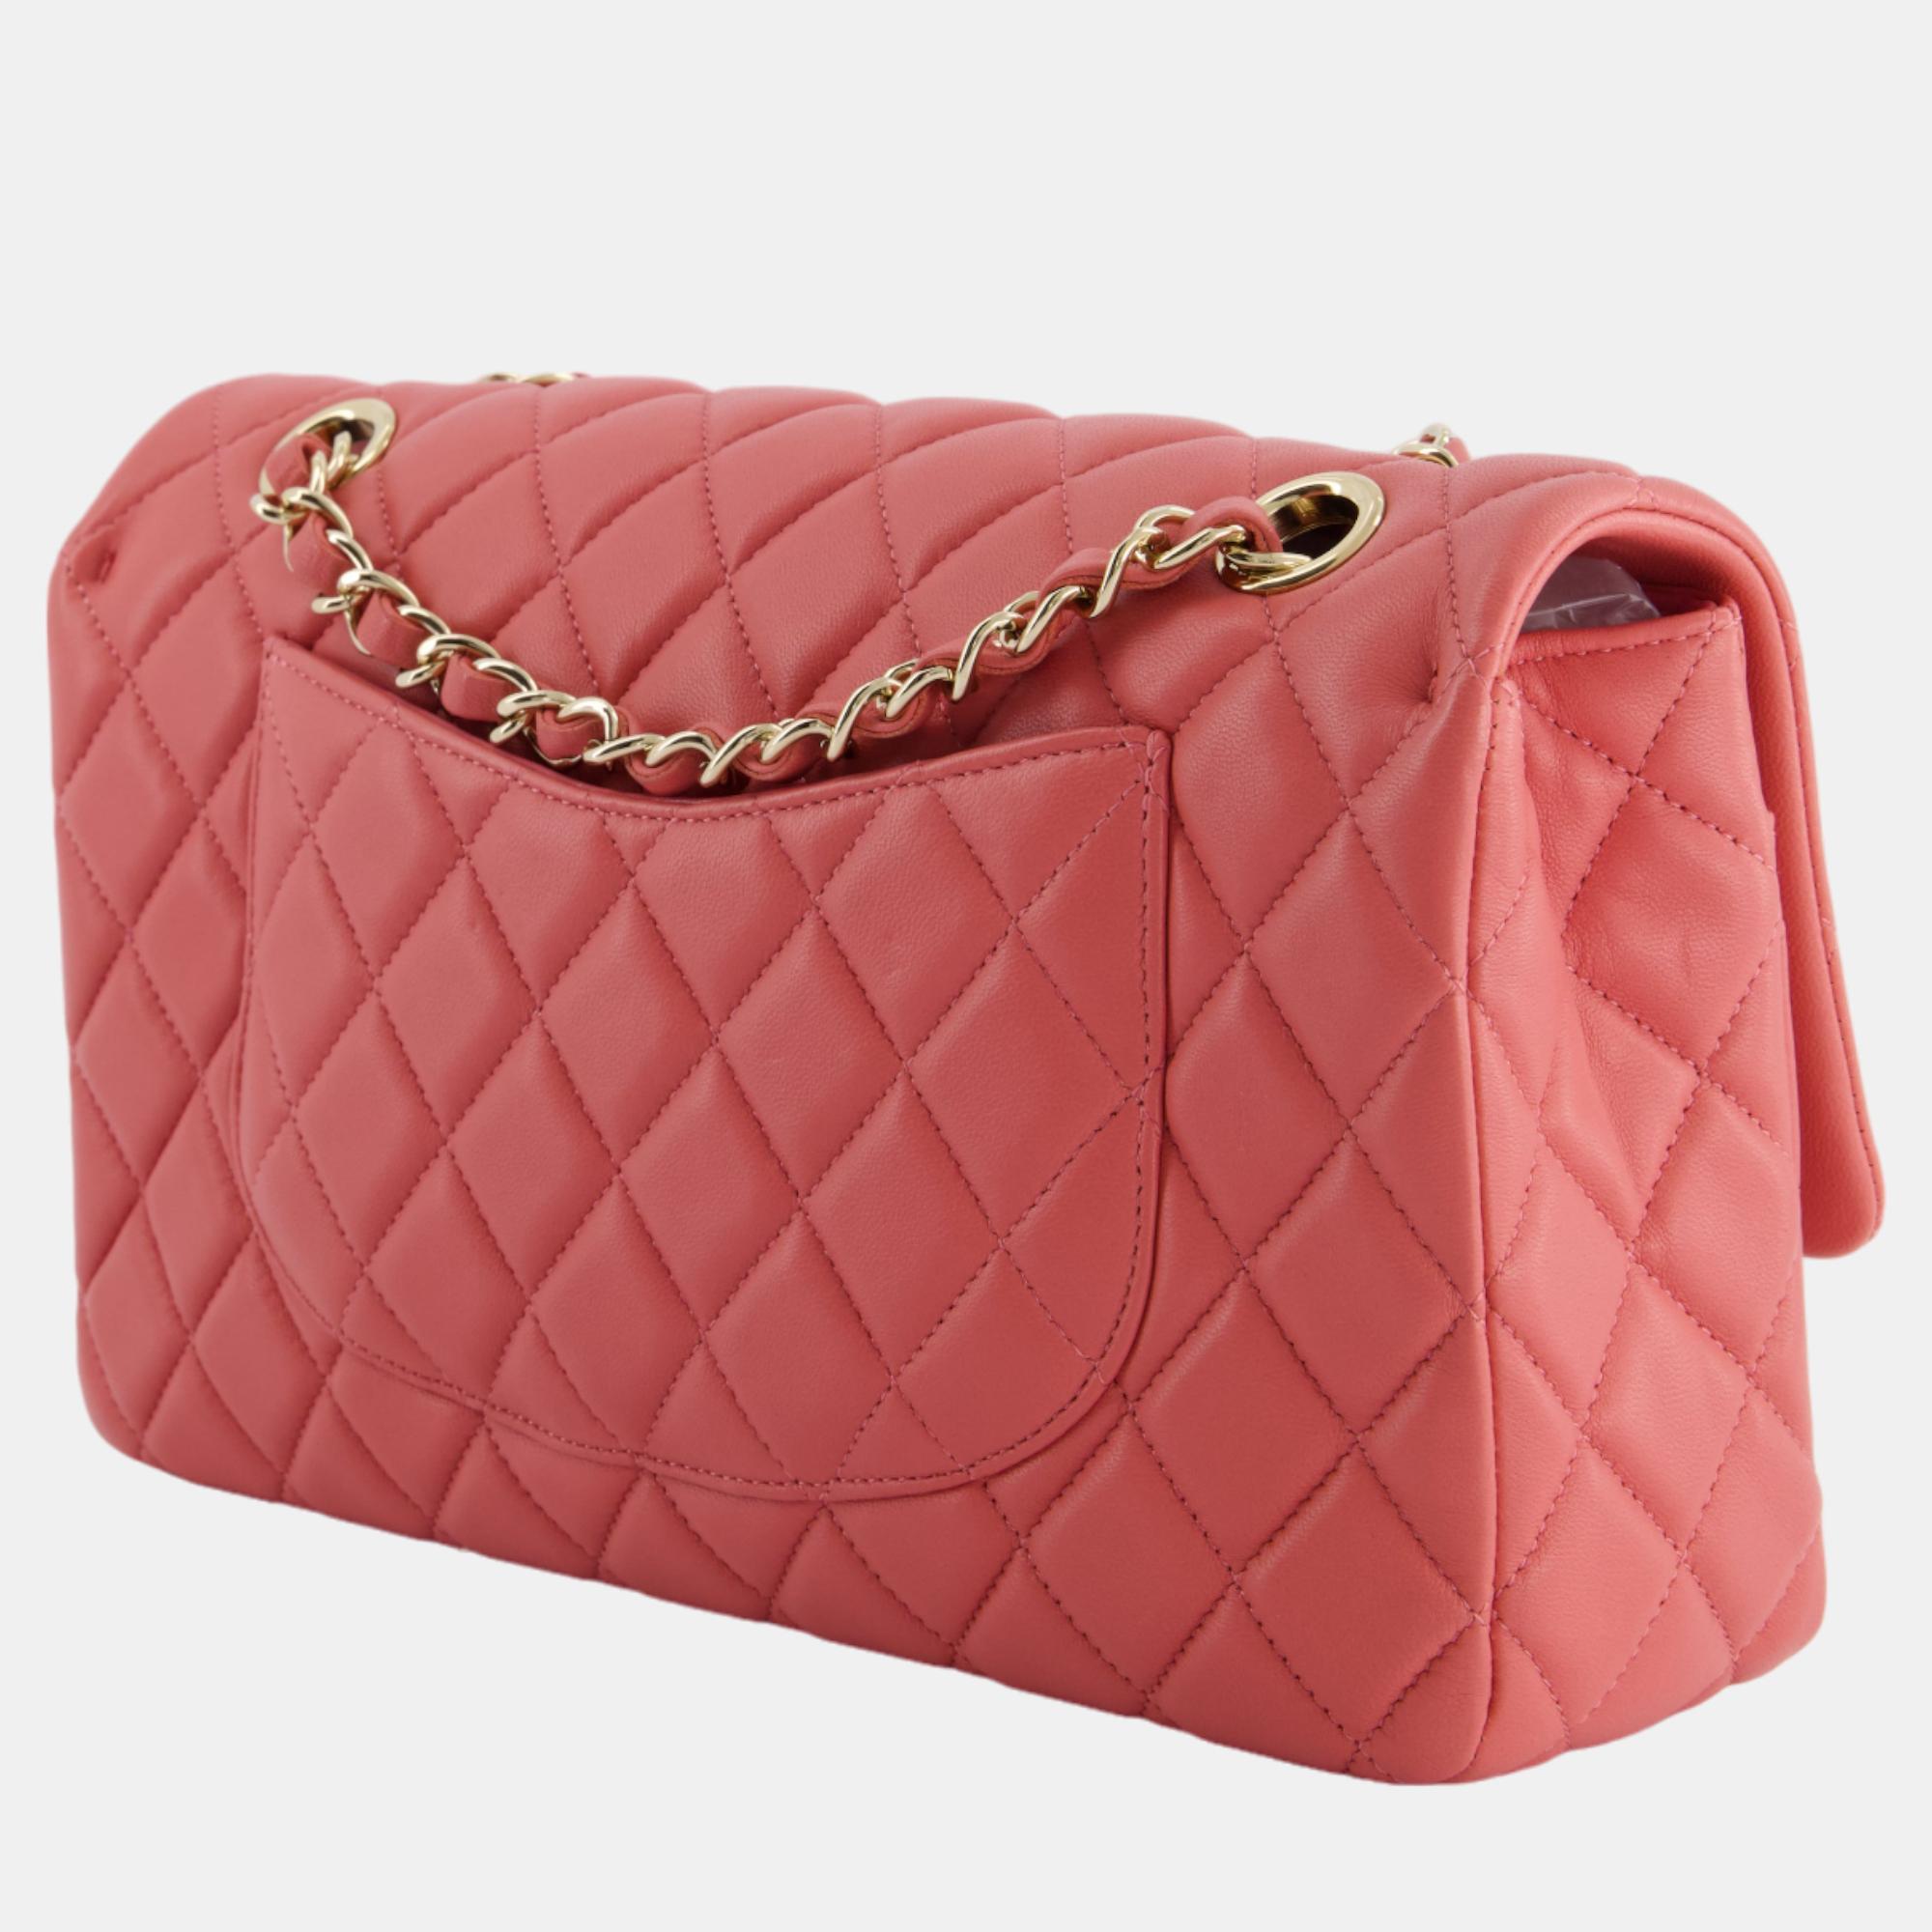 Chanel Pink Medium Single Flap Bag In Lambskin Leather With Champagne Gold Hardware